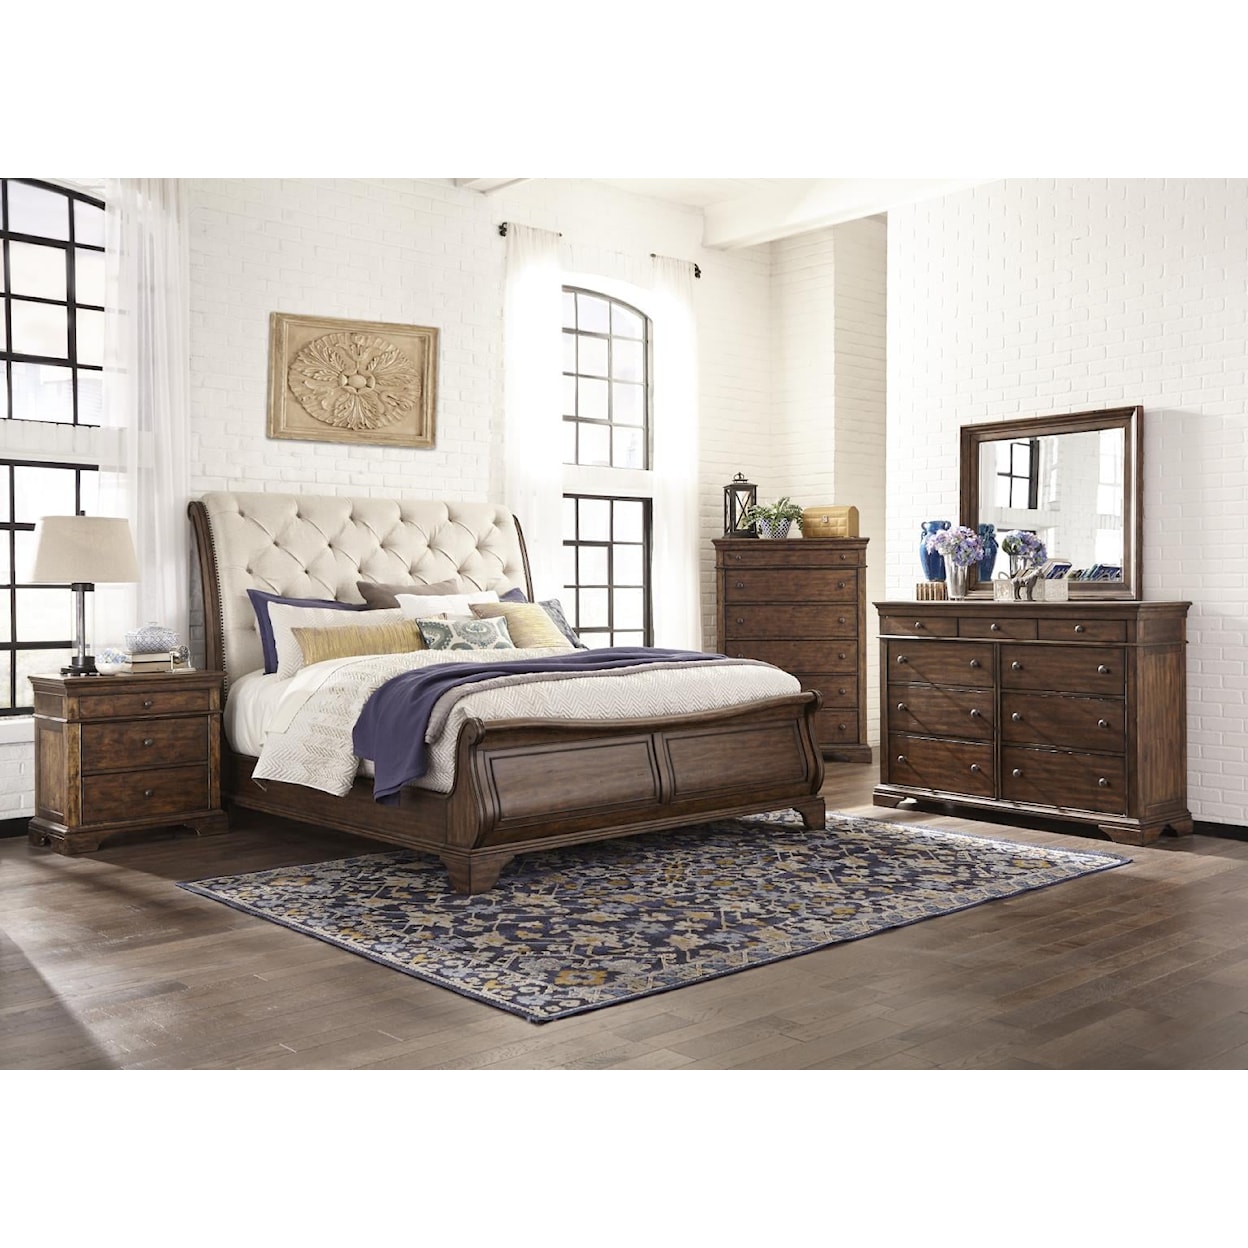 Trisha Yearwood Home Collection by Legacy Classic Trisha Yearwood Home King Upholstered Sleigh Bed